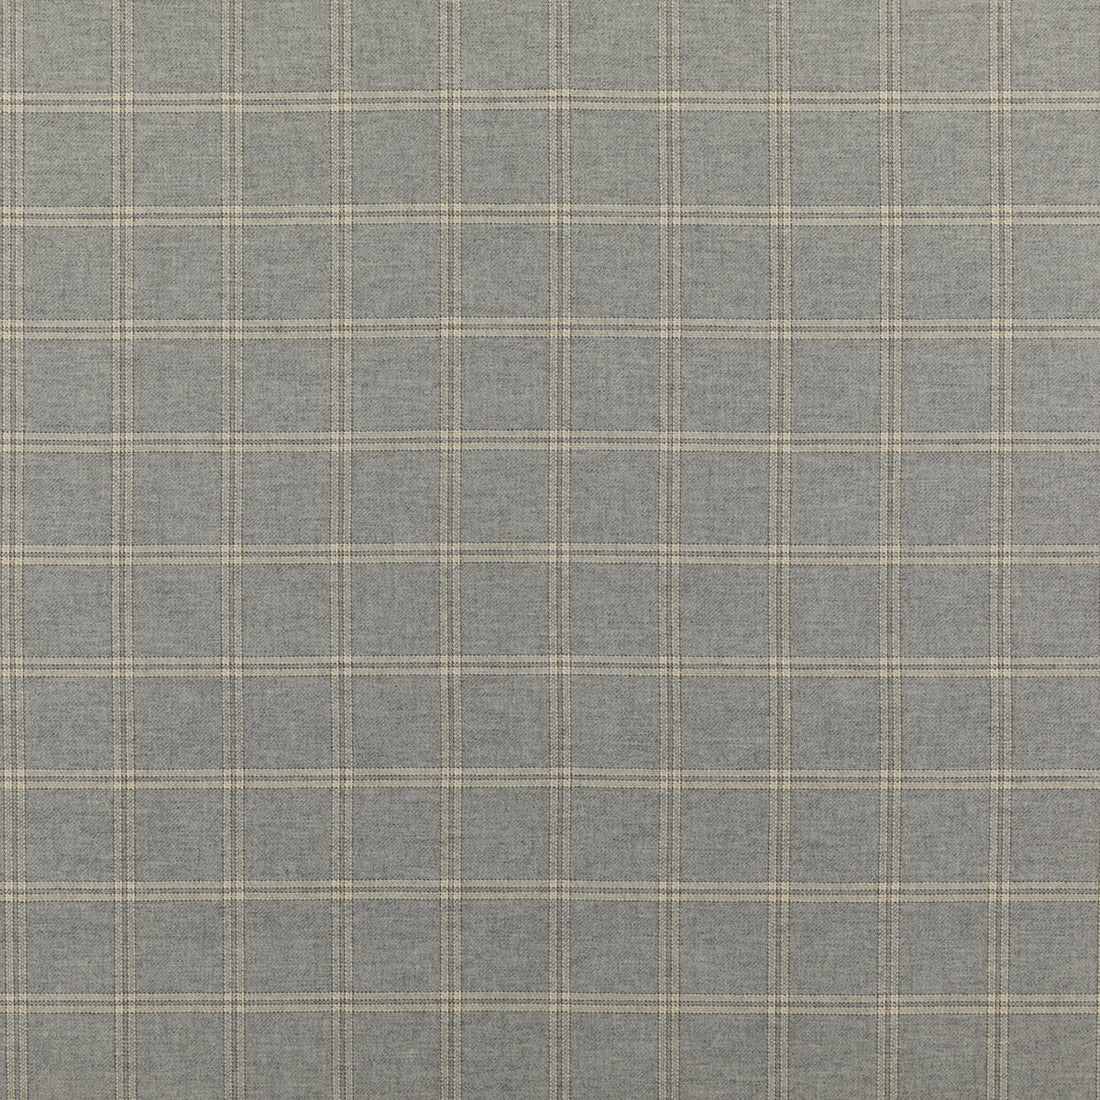 Walton fabric in shingle color - pattern FD775.A48.0 - by Mulberry in the Modern Country collection